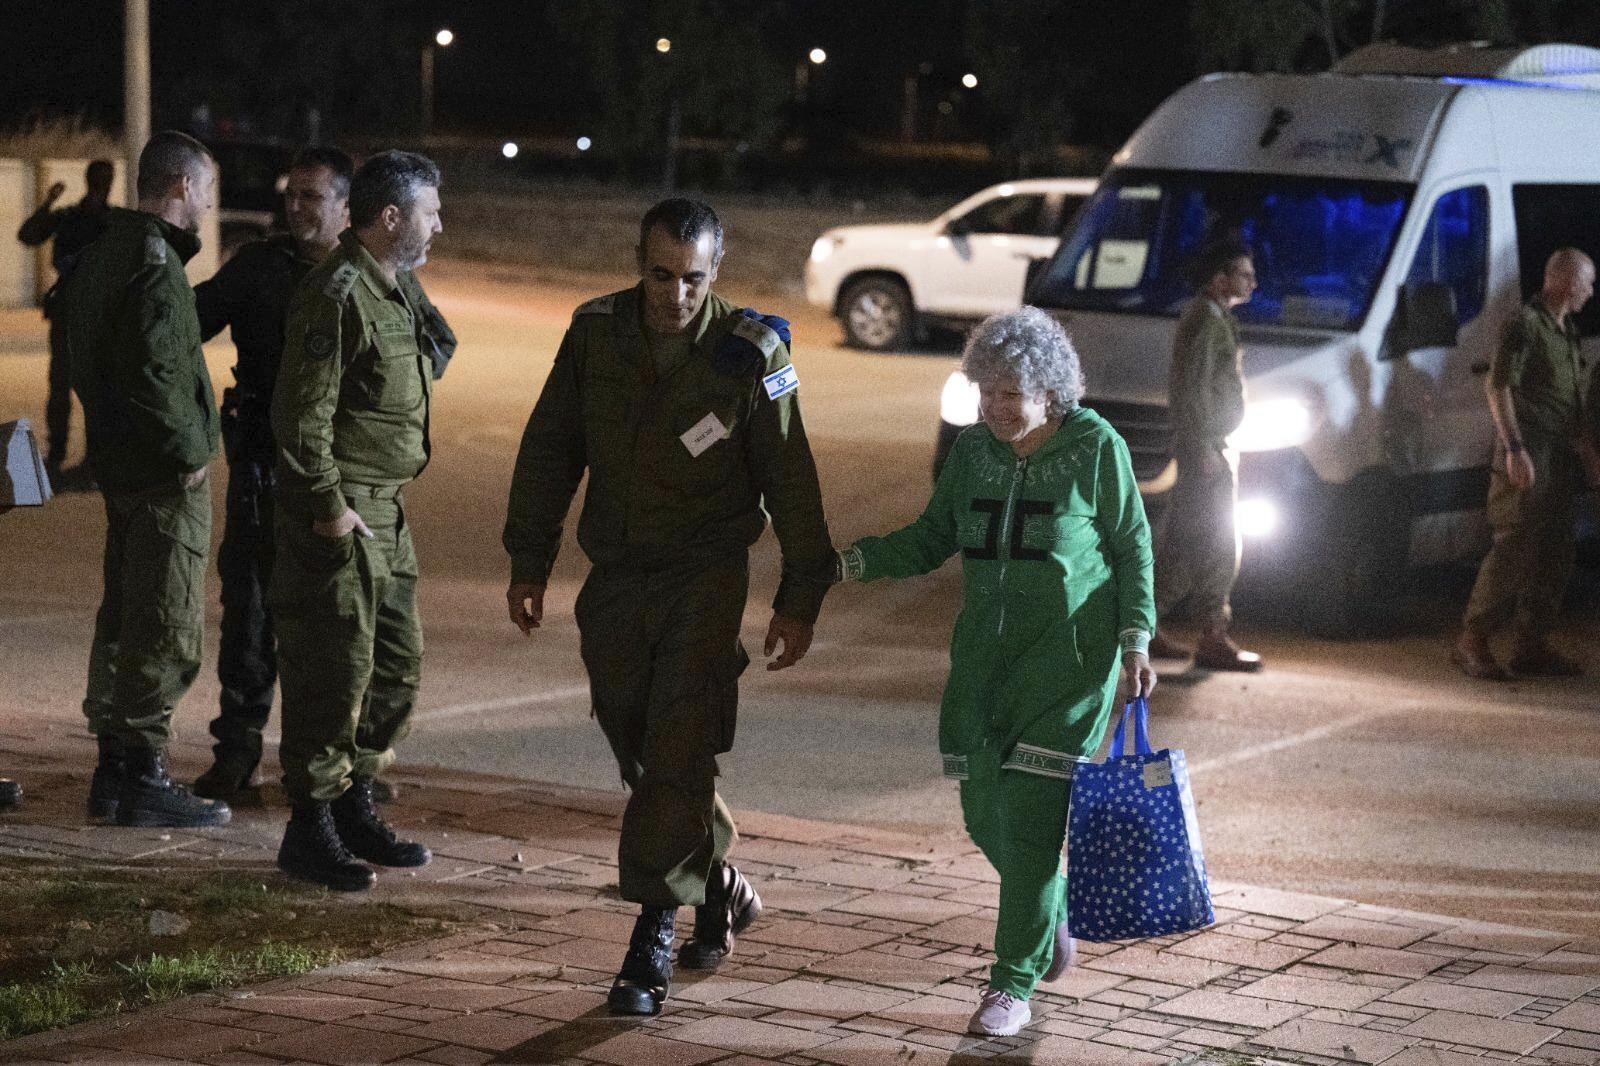 An elderly lady walks next to an Israeli soldier at night, holding his arm. A van and other soldiers are behind them